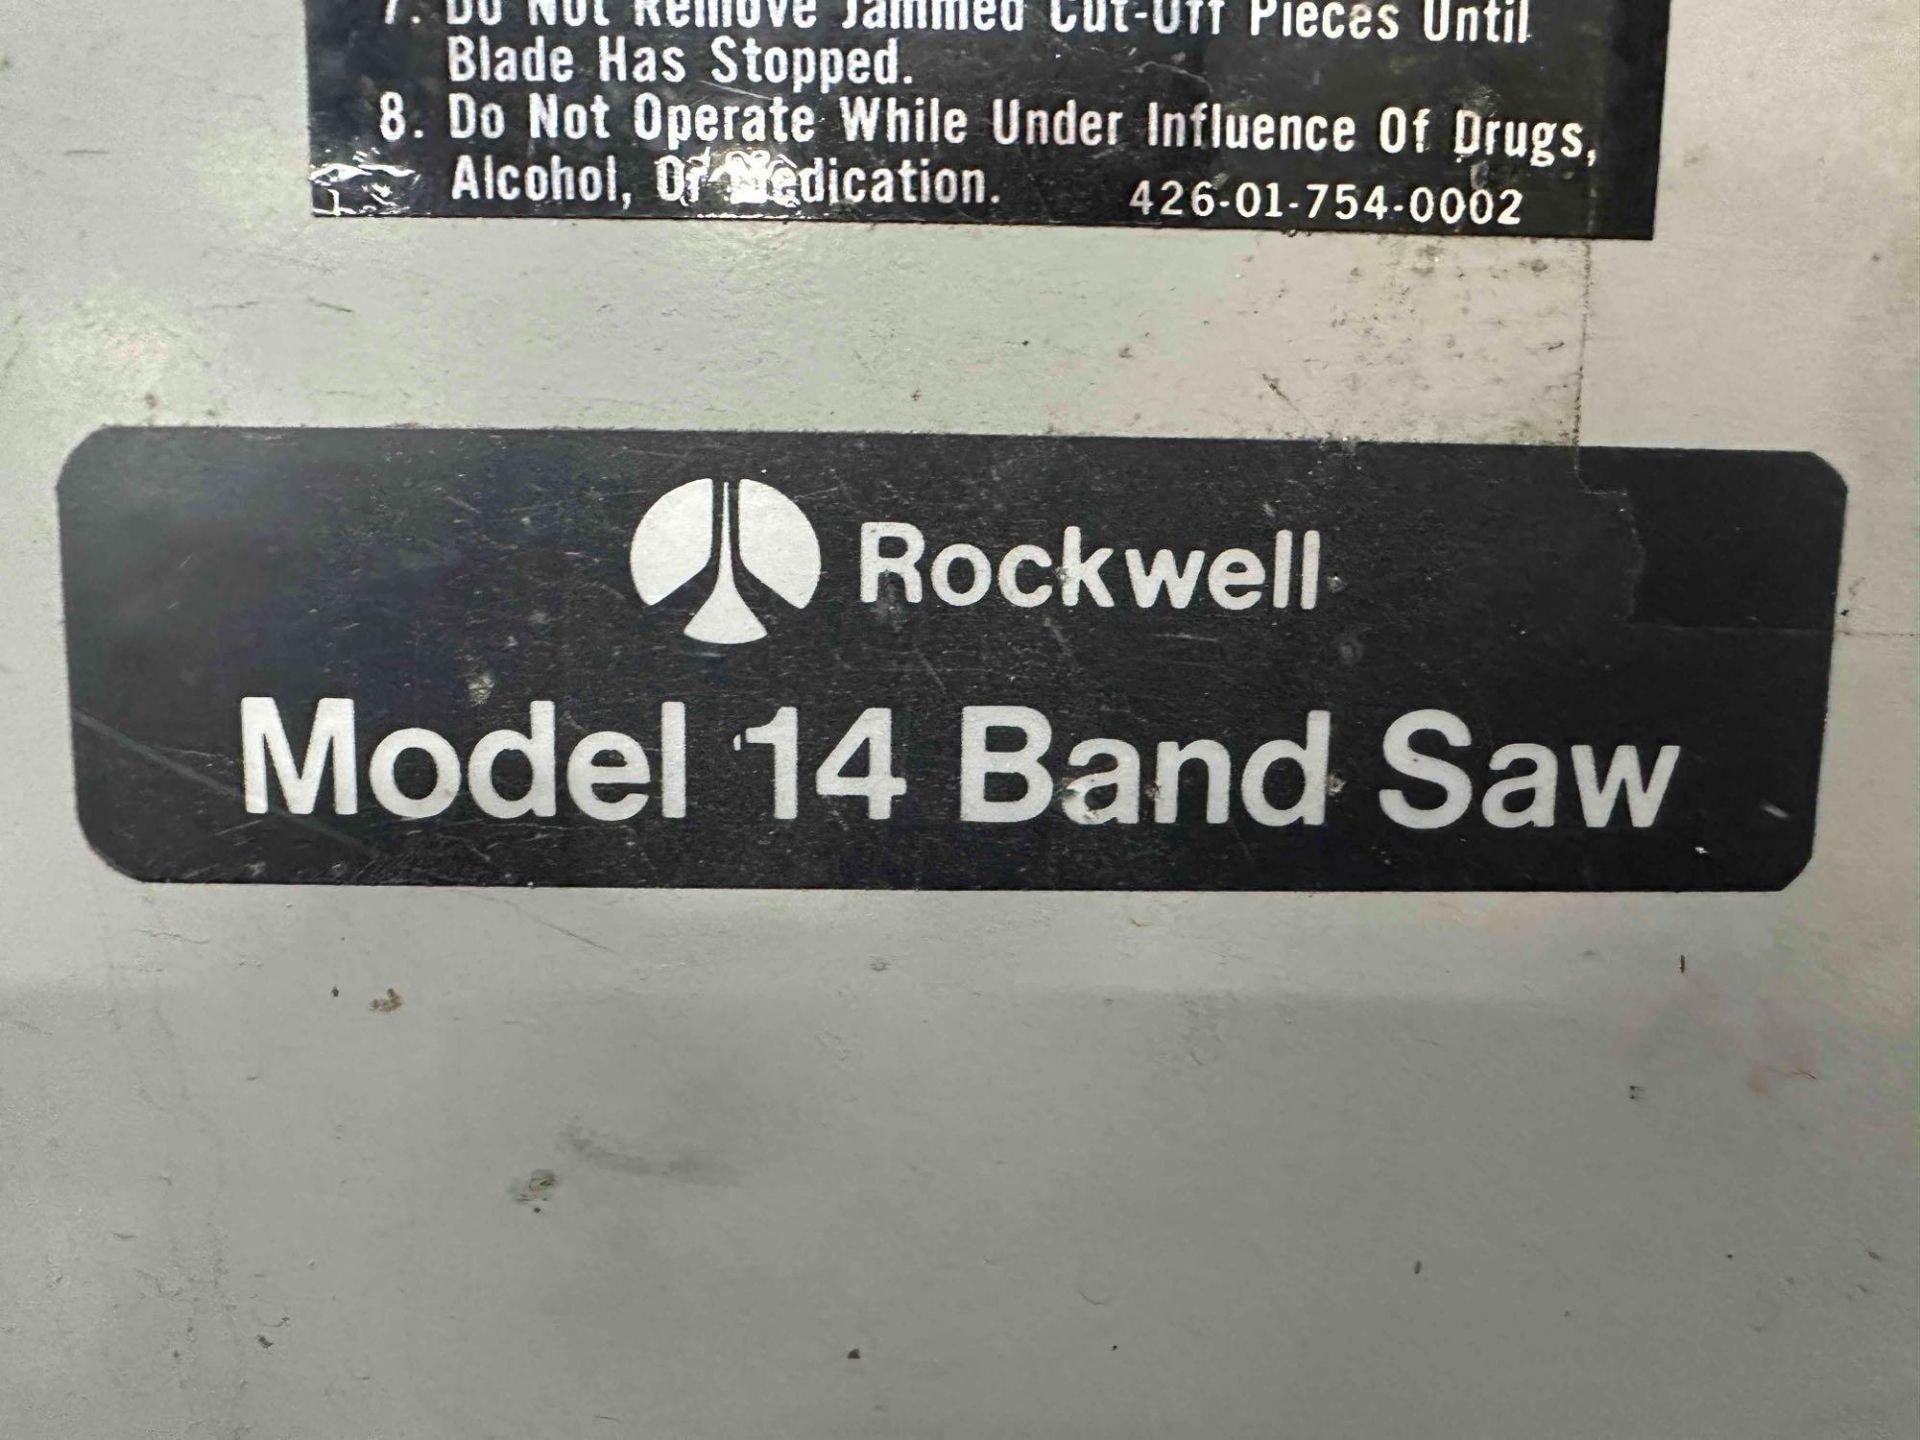 ROCKWELL MODEL 14 BAND SAW - Image 3 of 3